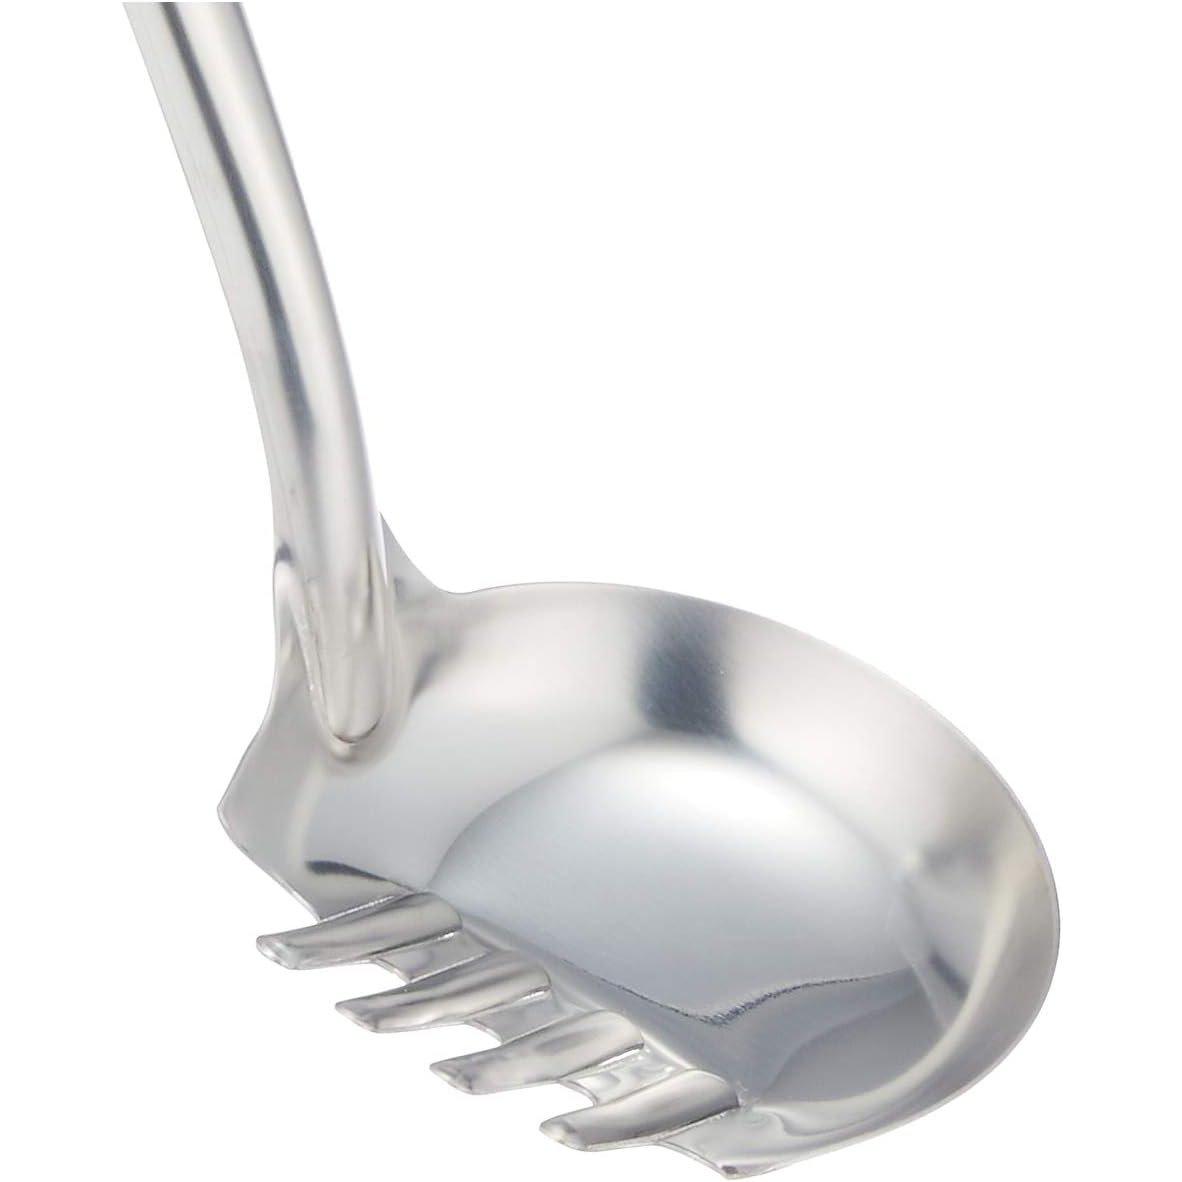 Japanese Udon Ladle Stainless Steel Ladle for Noodles 260mm